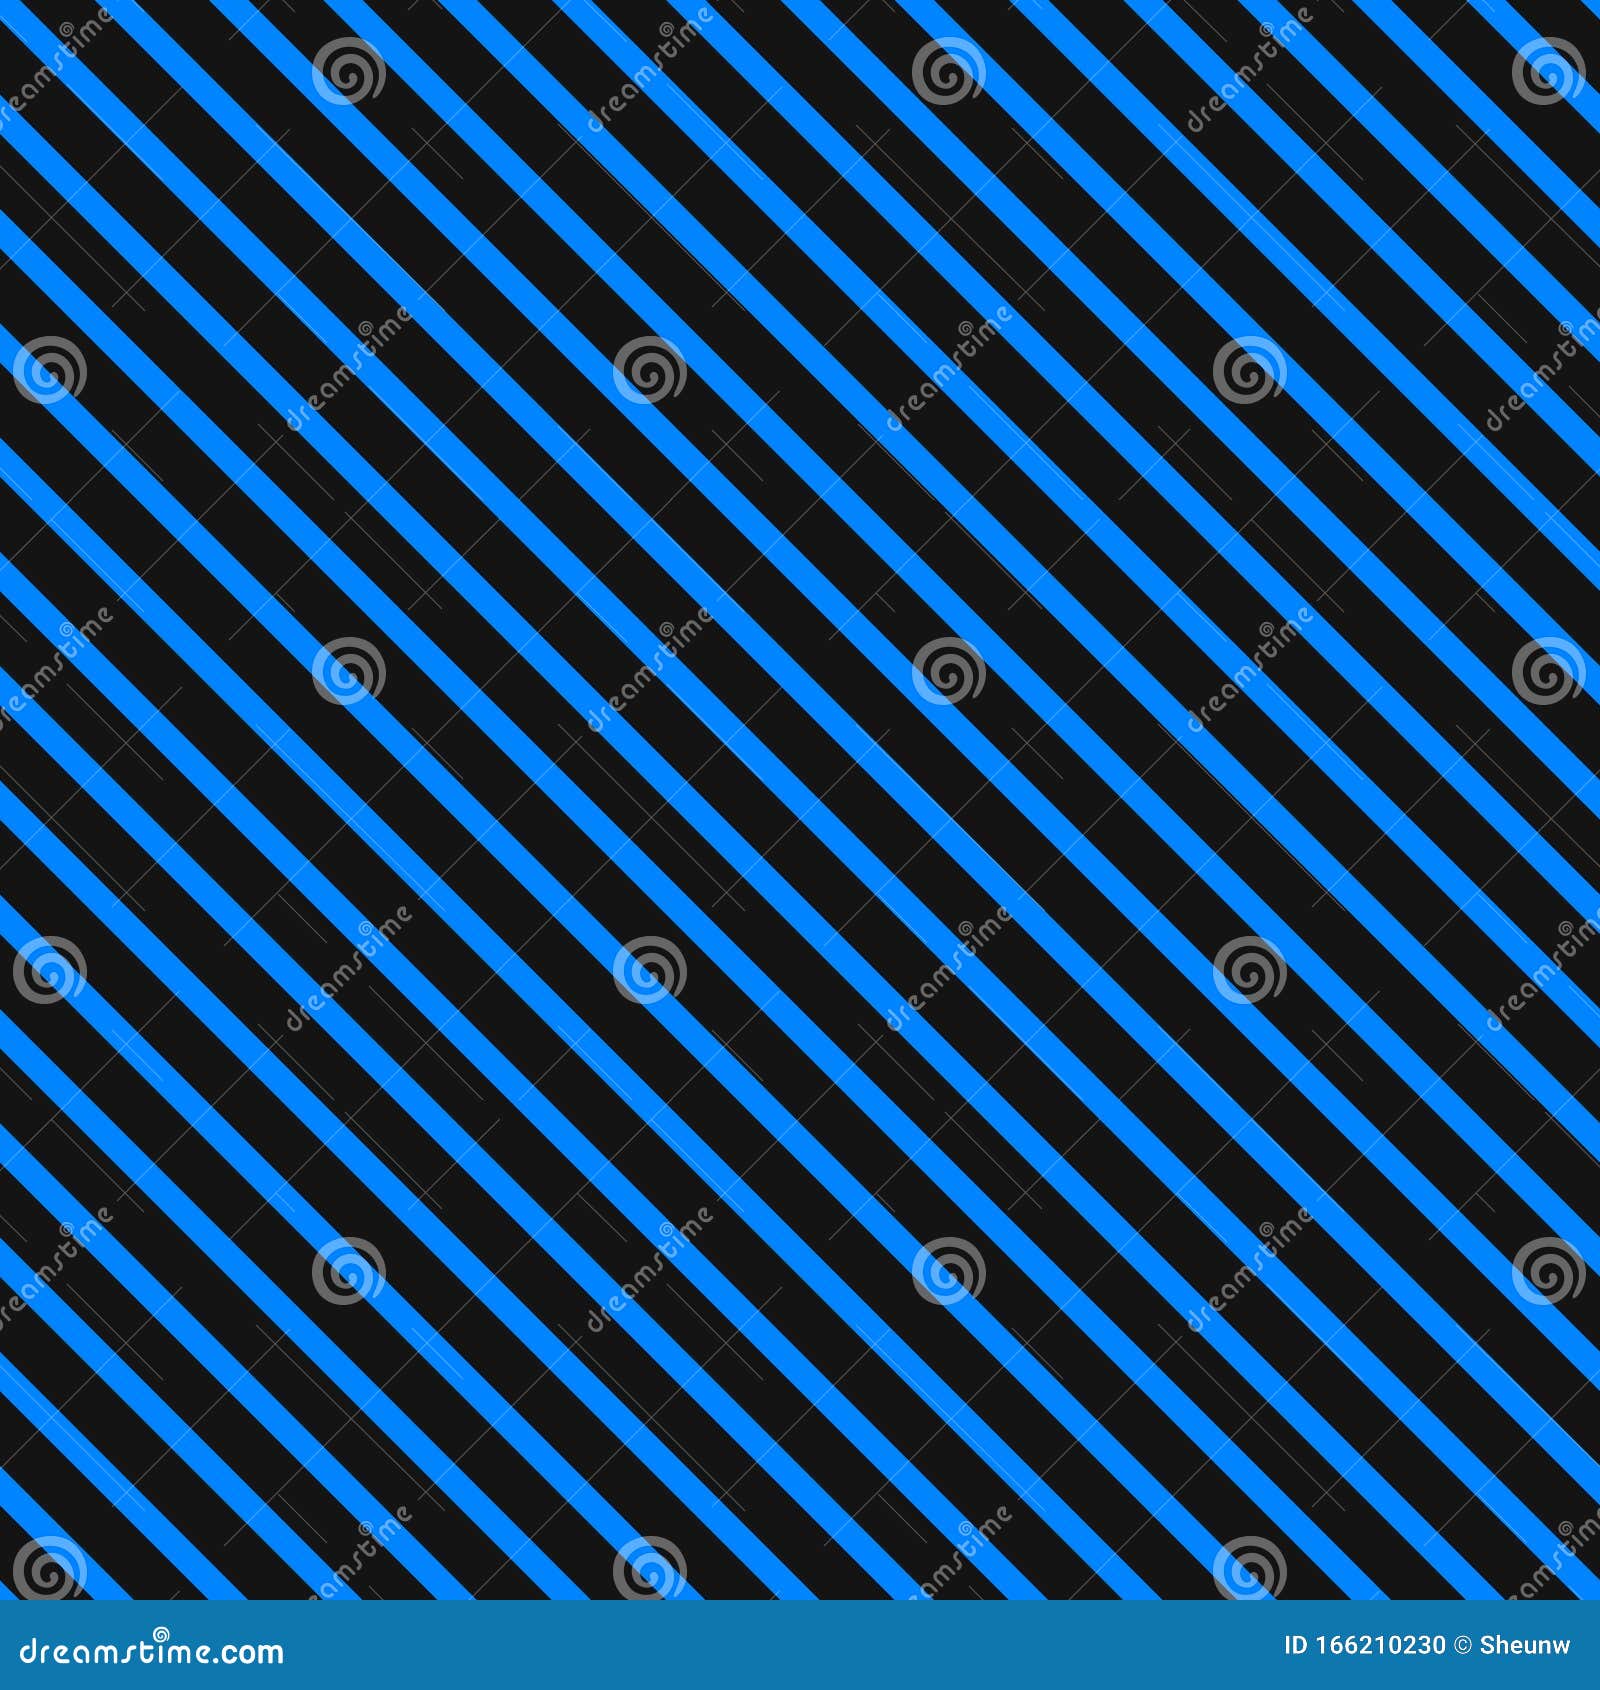 Vector Seamless Striped Pattern Dark Blue Background With Diagonal